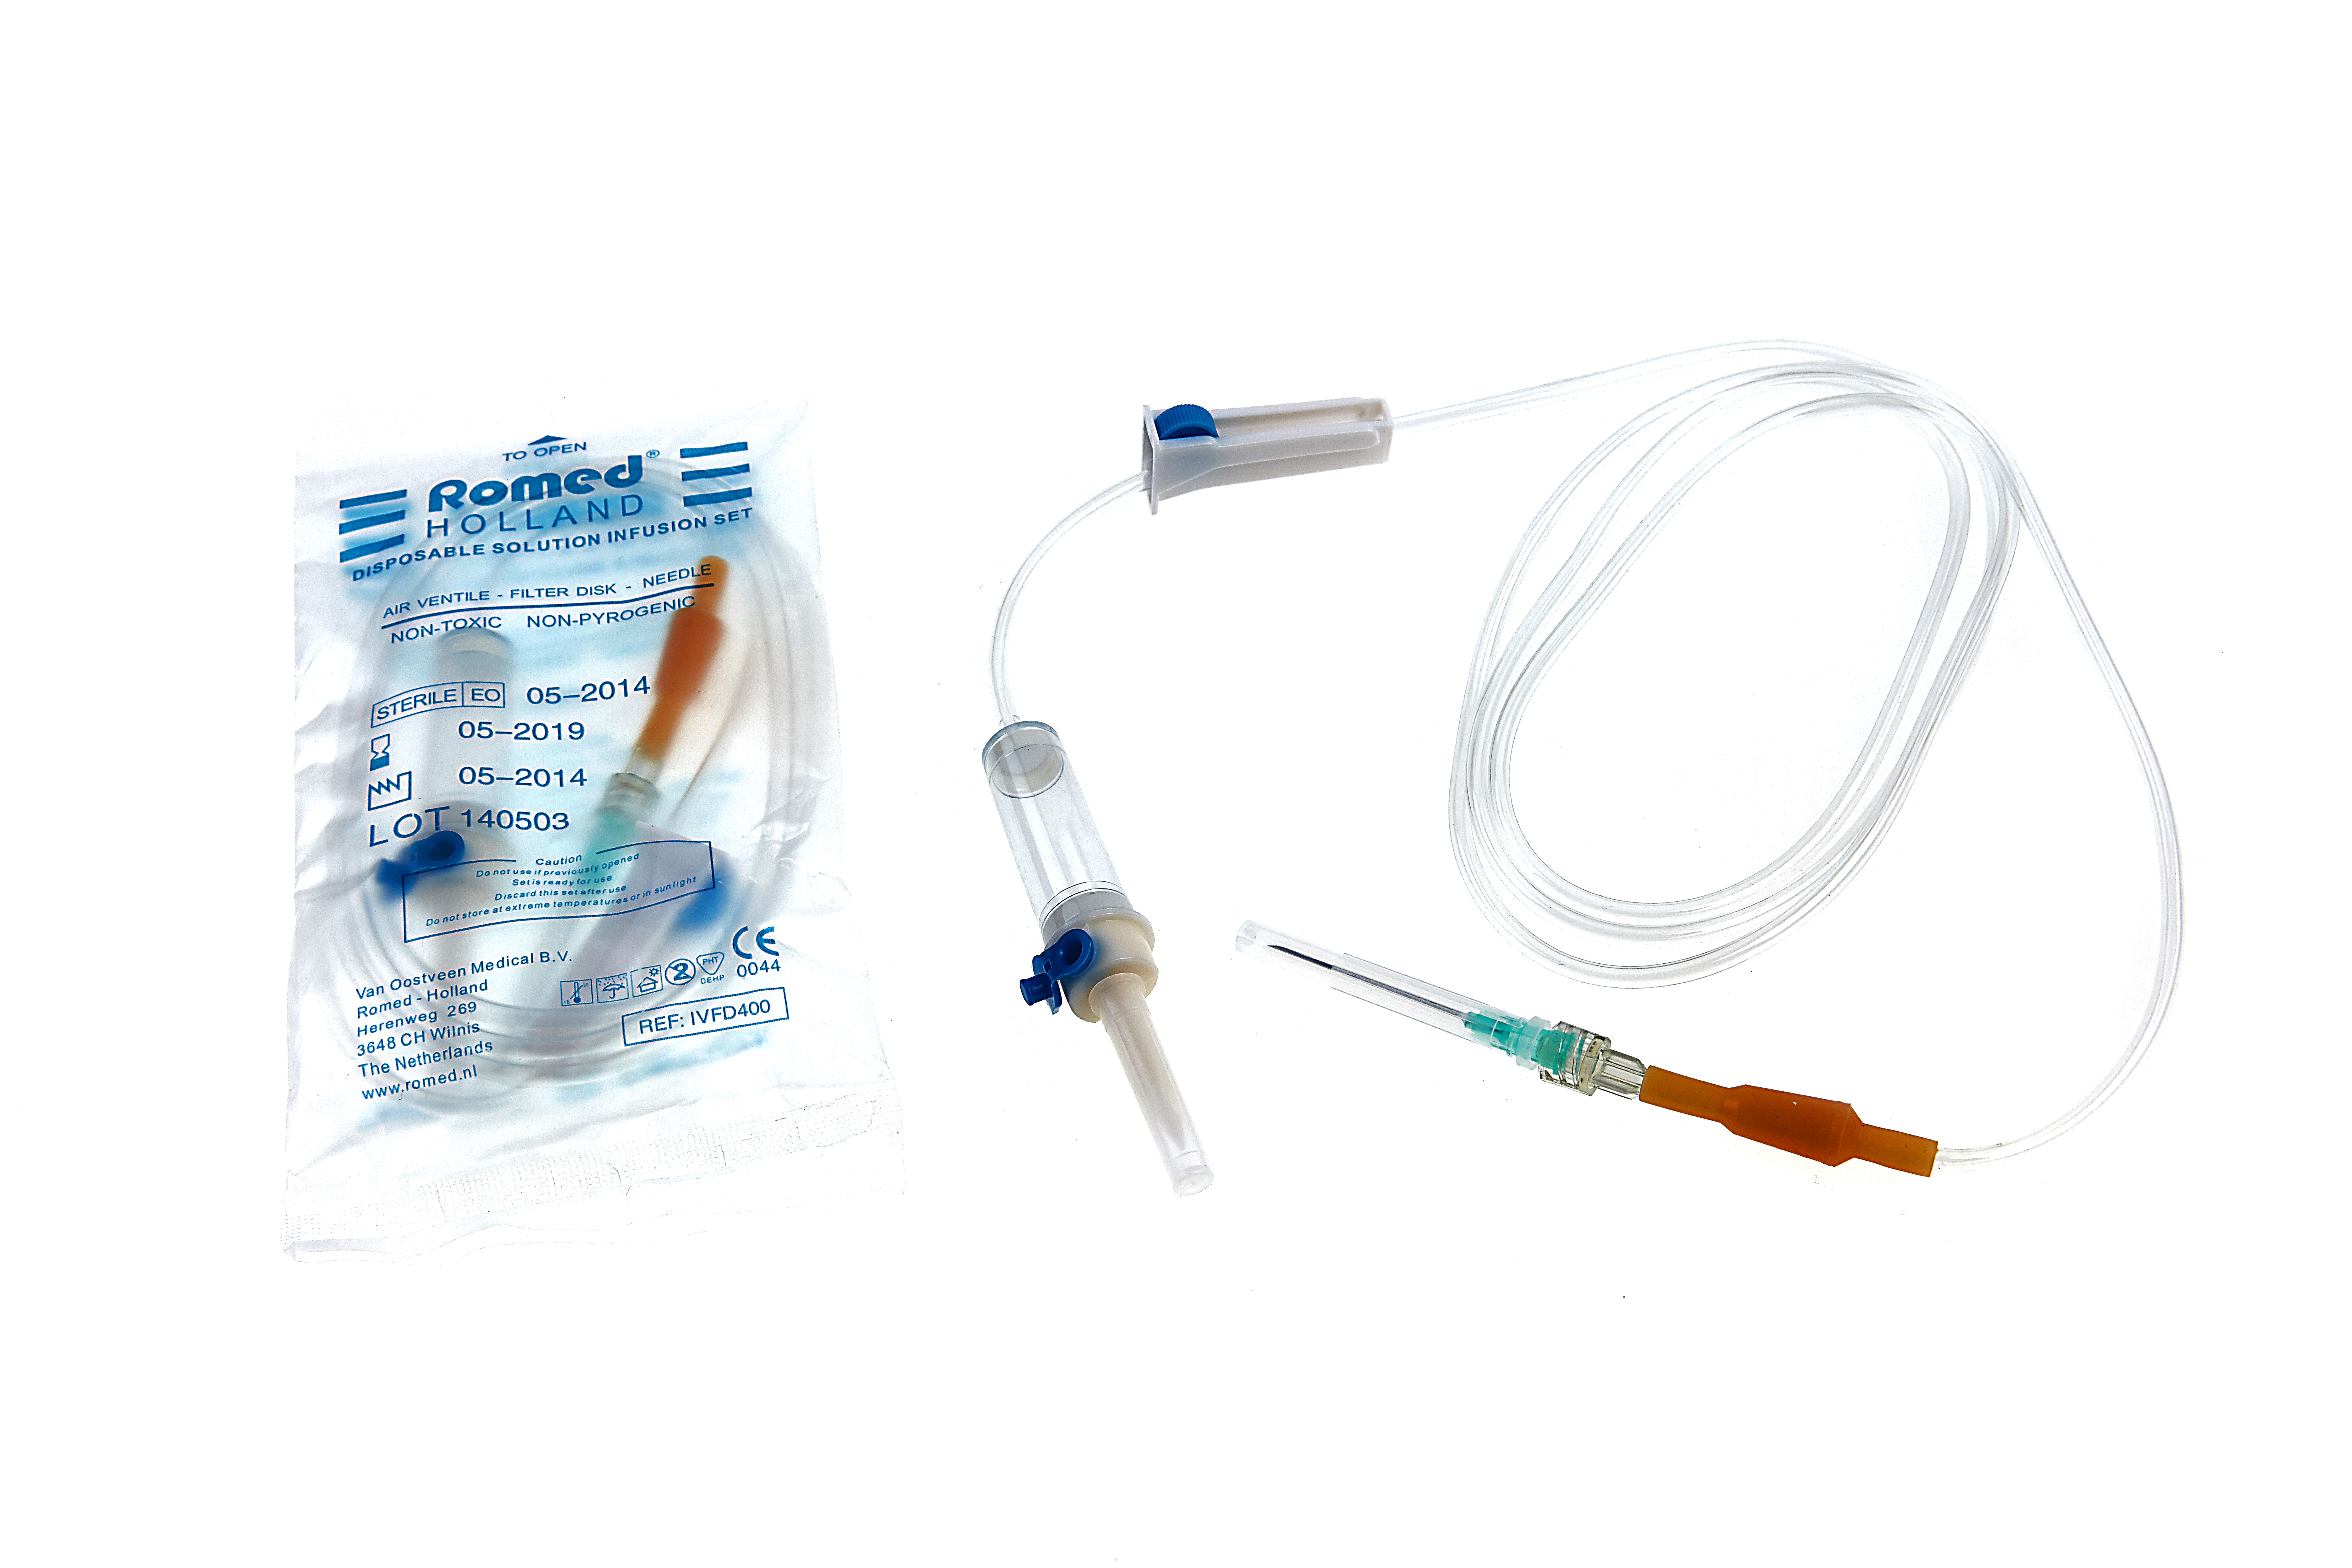 IVFD400 Romed disposable solution infusion sets, with airway needle and filter, sterile per piece in a polybag, 400 pcs in a carton.